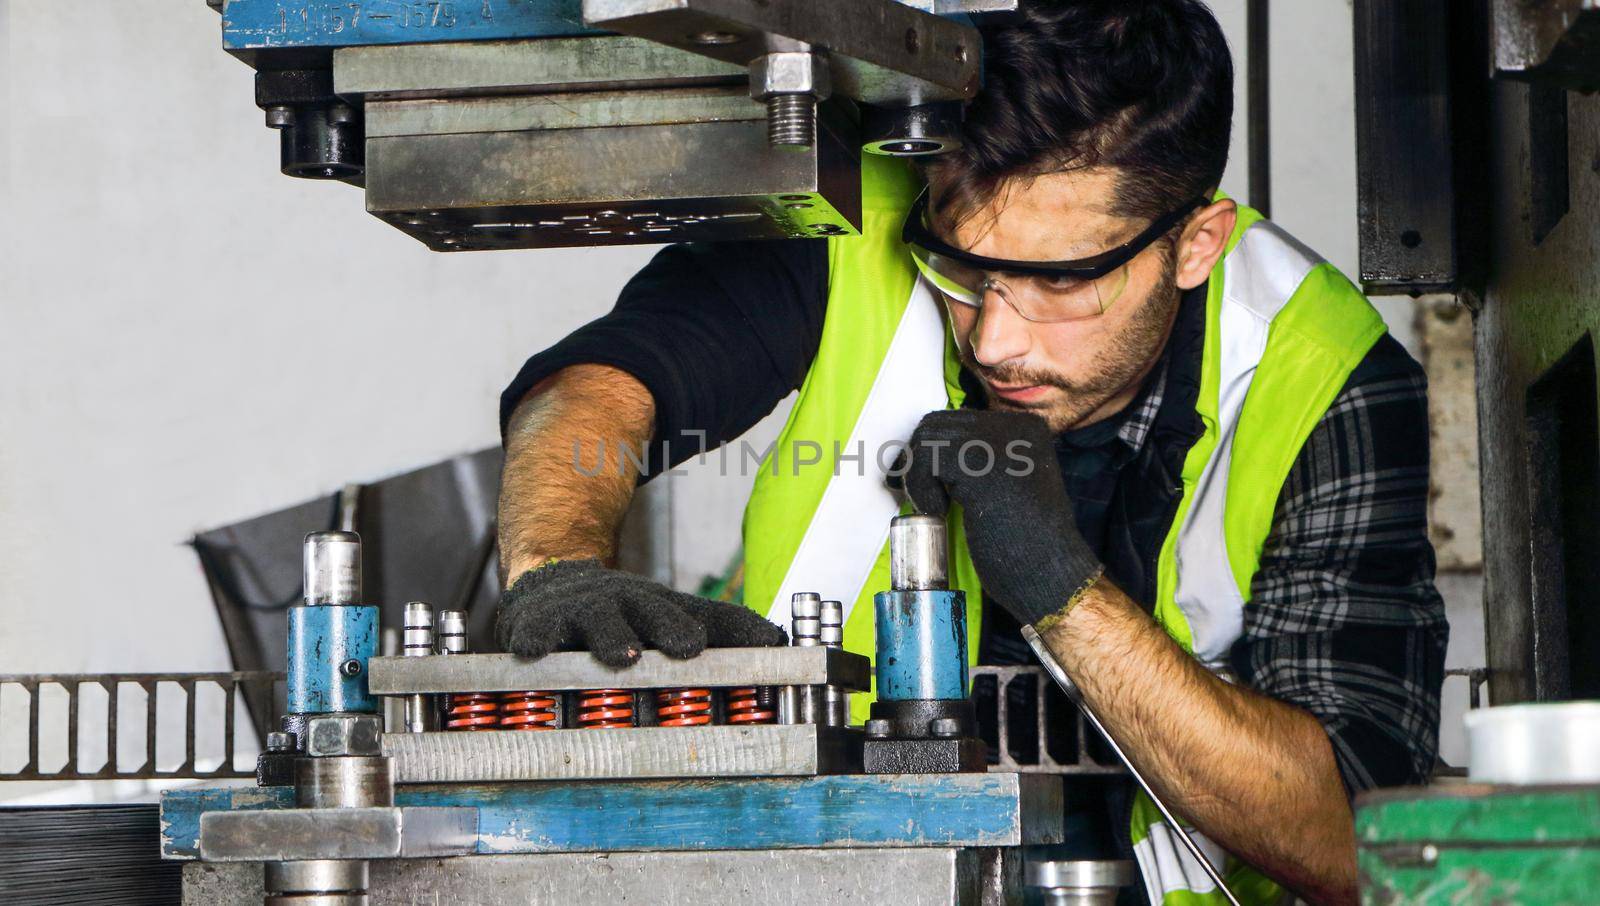 Portrait of a professional male engineer Wears safety uniforms and glasses. Maintenance and setup of machines In industrial factories producing metal parts with confidence Concept of engineering work